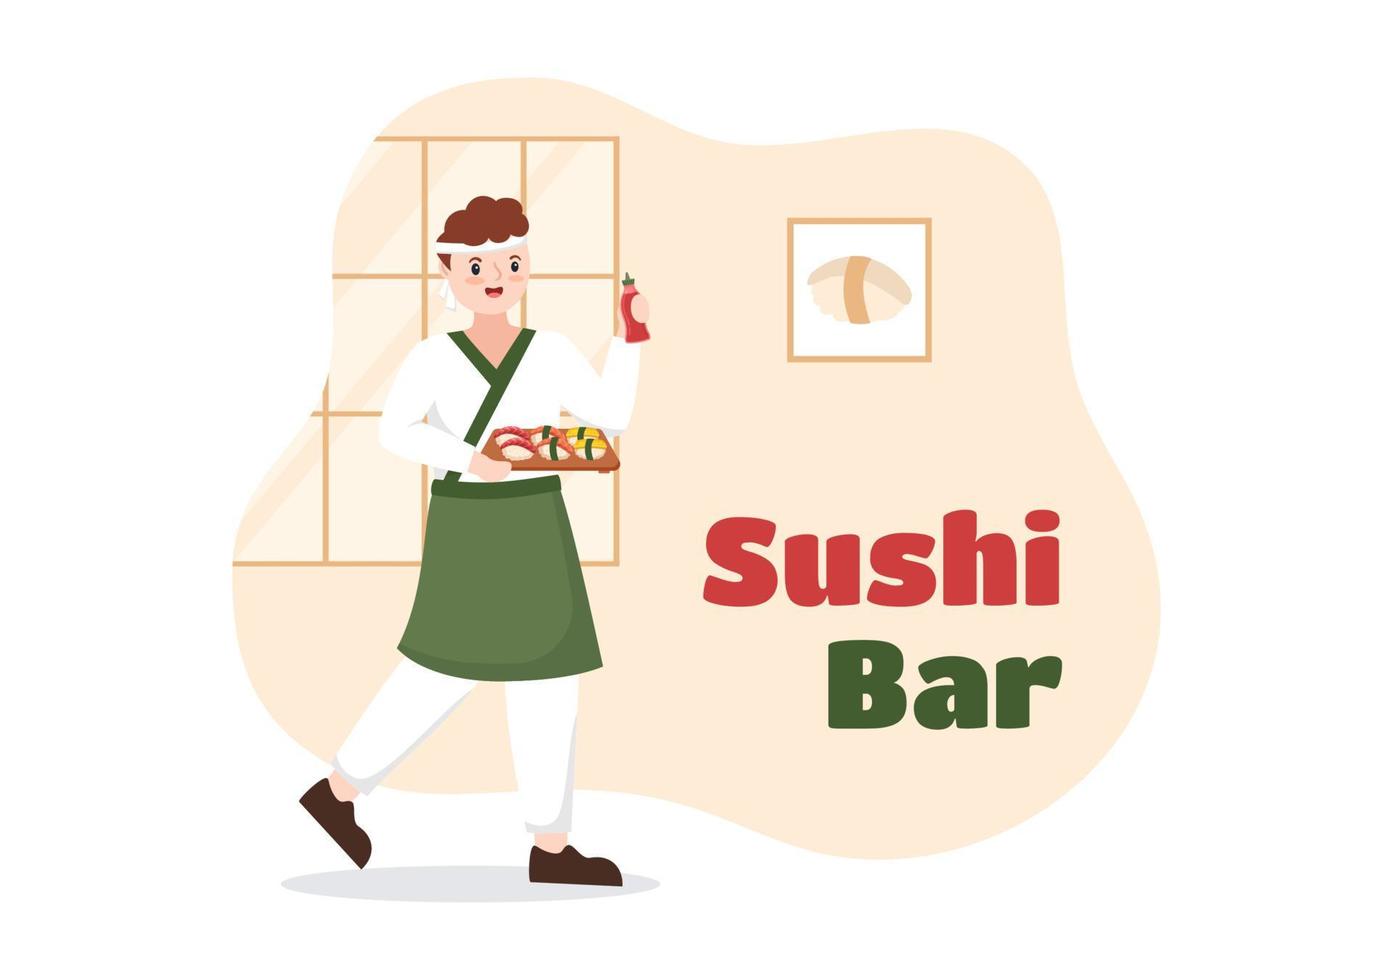 Sushi Bar Japan Asian Food or Restaurant of Sashimi and Rolls for Eating with Soy Sauce and Wasabi in Template Hand Drawn Cartoon Flat Illustration vector